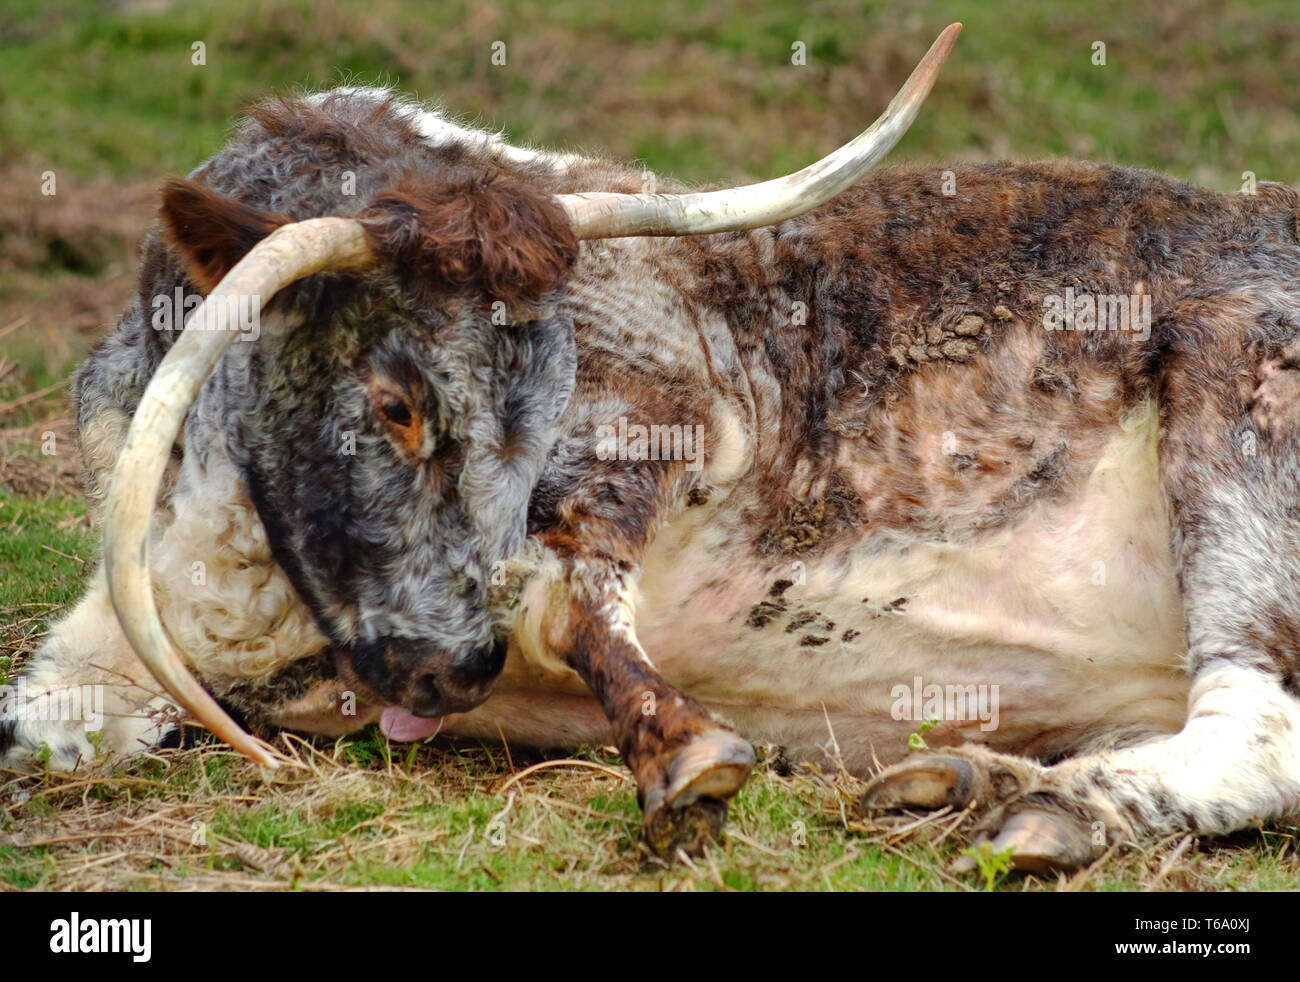 English longhorn cattle grazing on Chailey Common nature reserve. Stock Photo